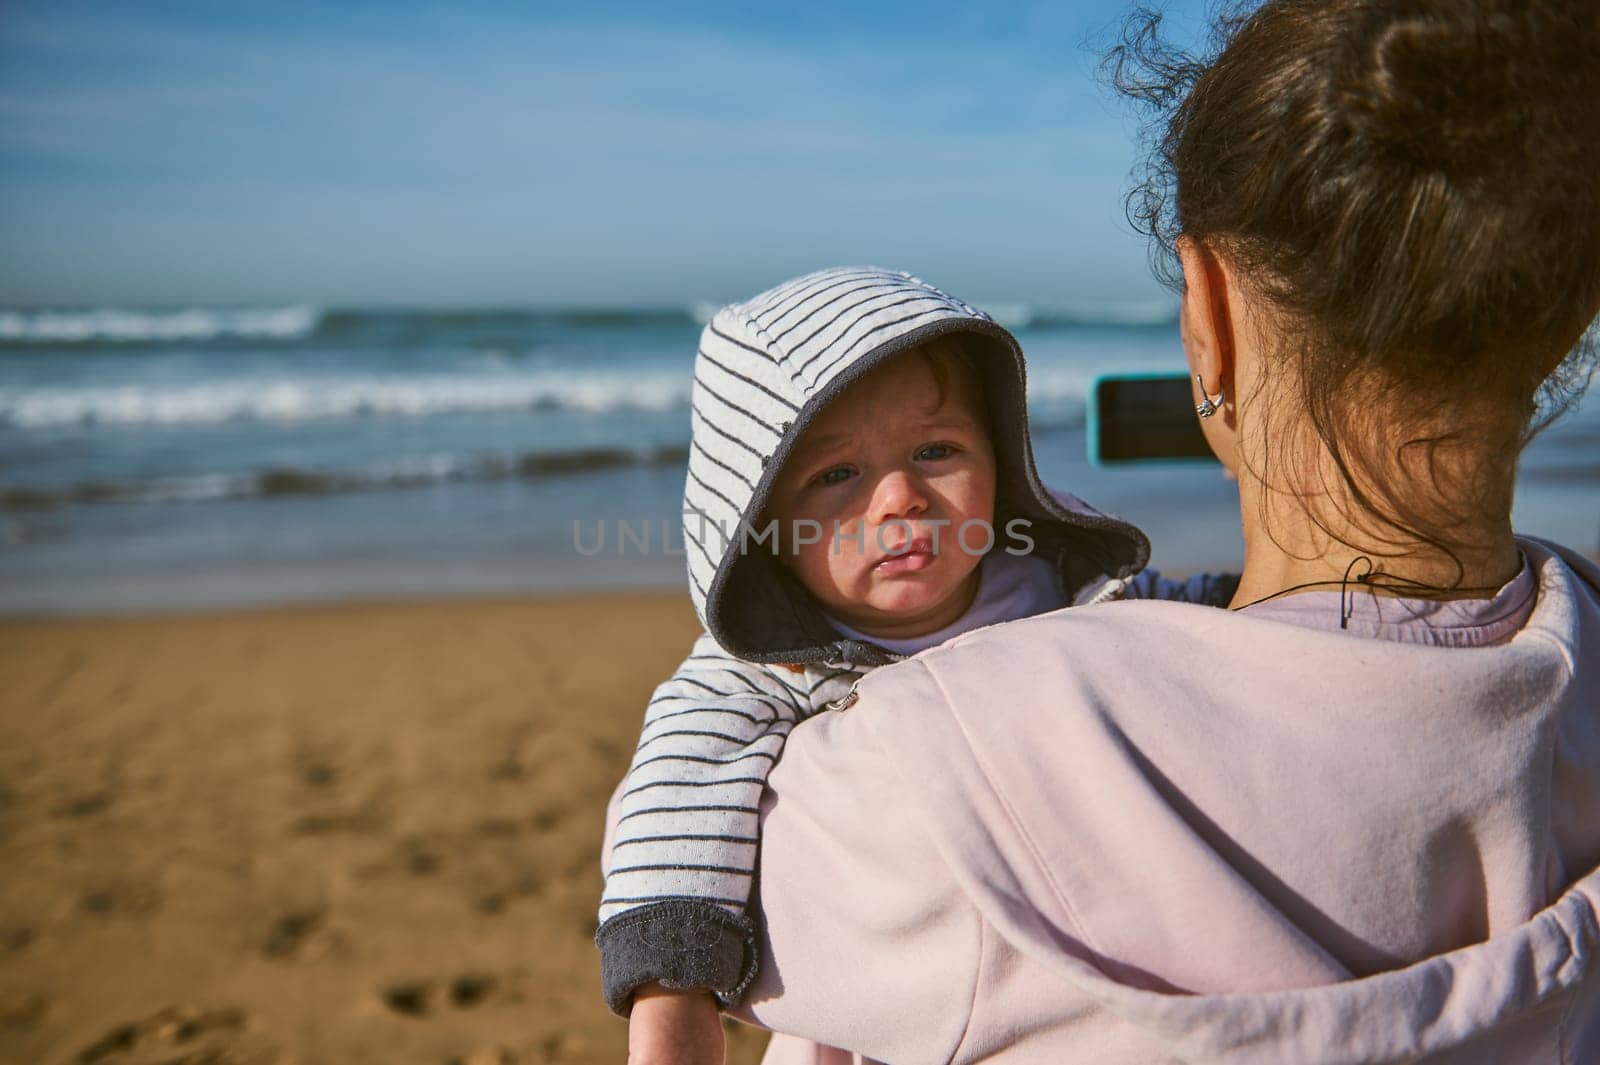 Adorable baby boy in arms of his mother taking photo of sea on smartphone, standing on sandy beach back to camera by artgf